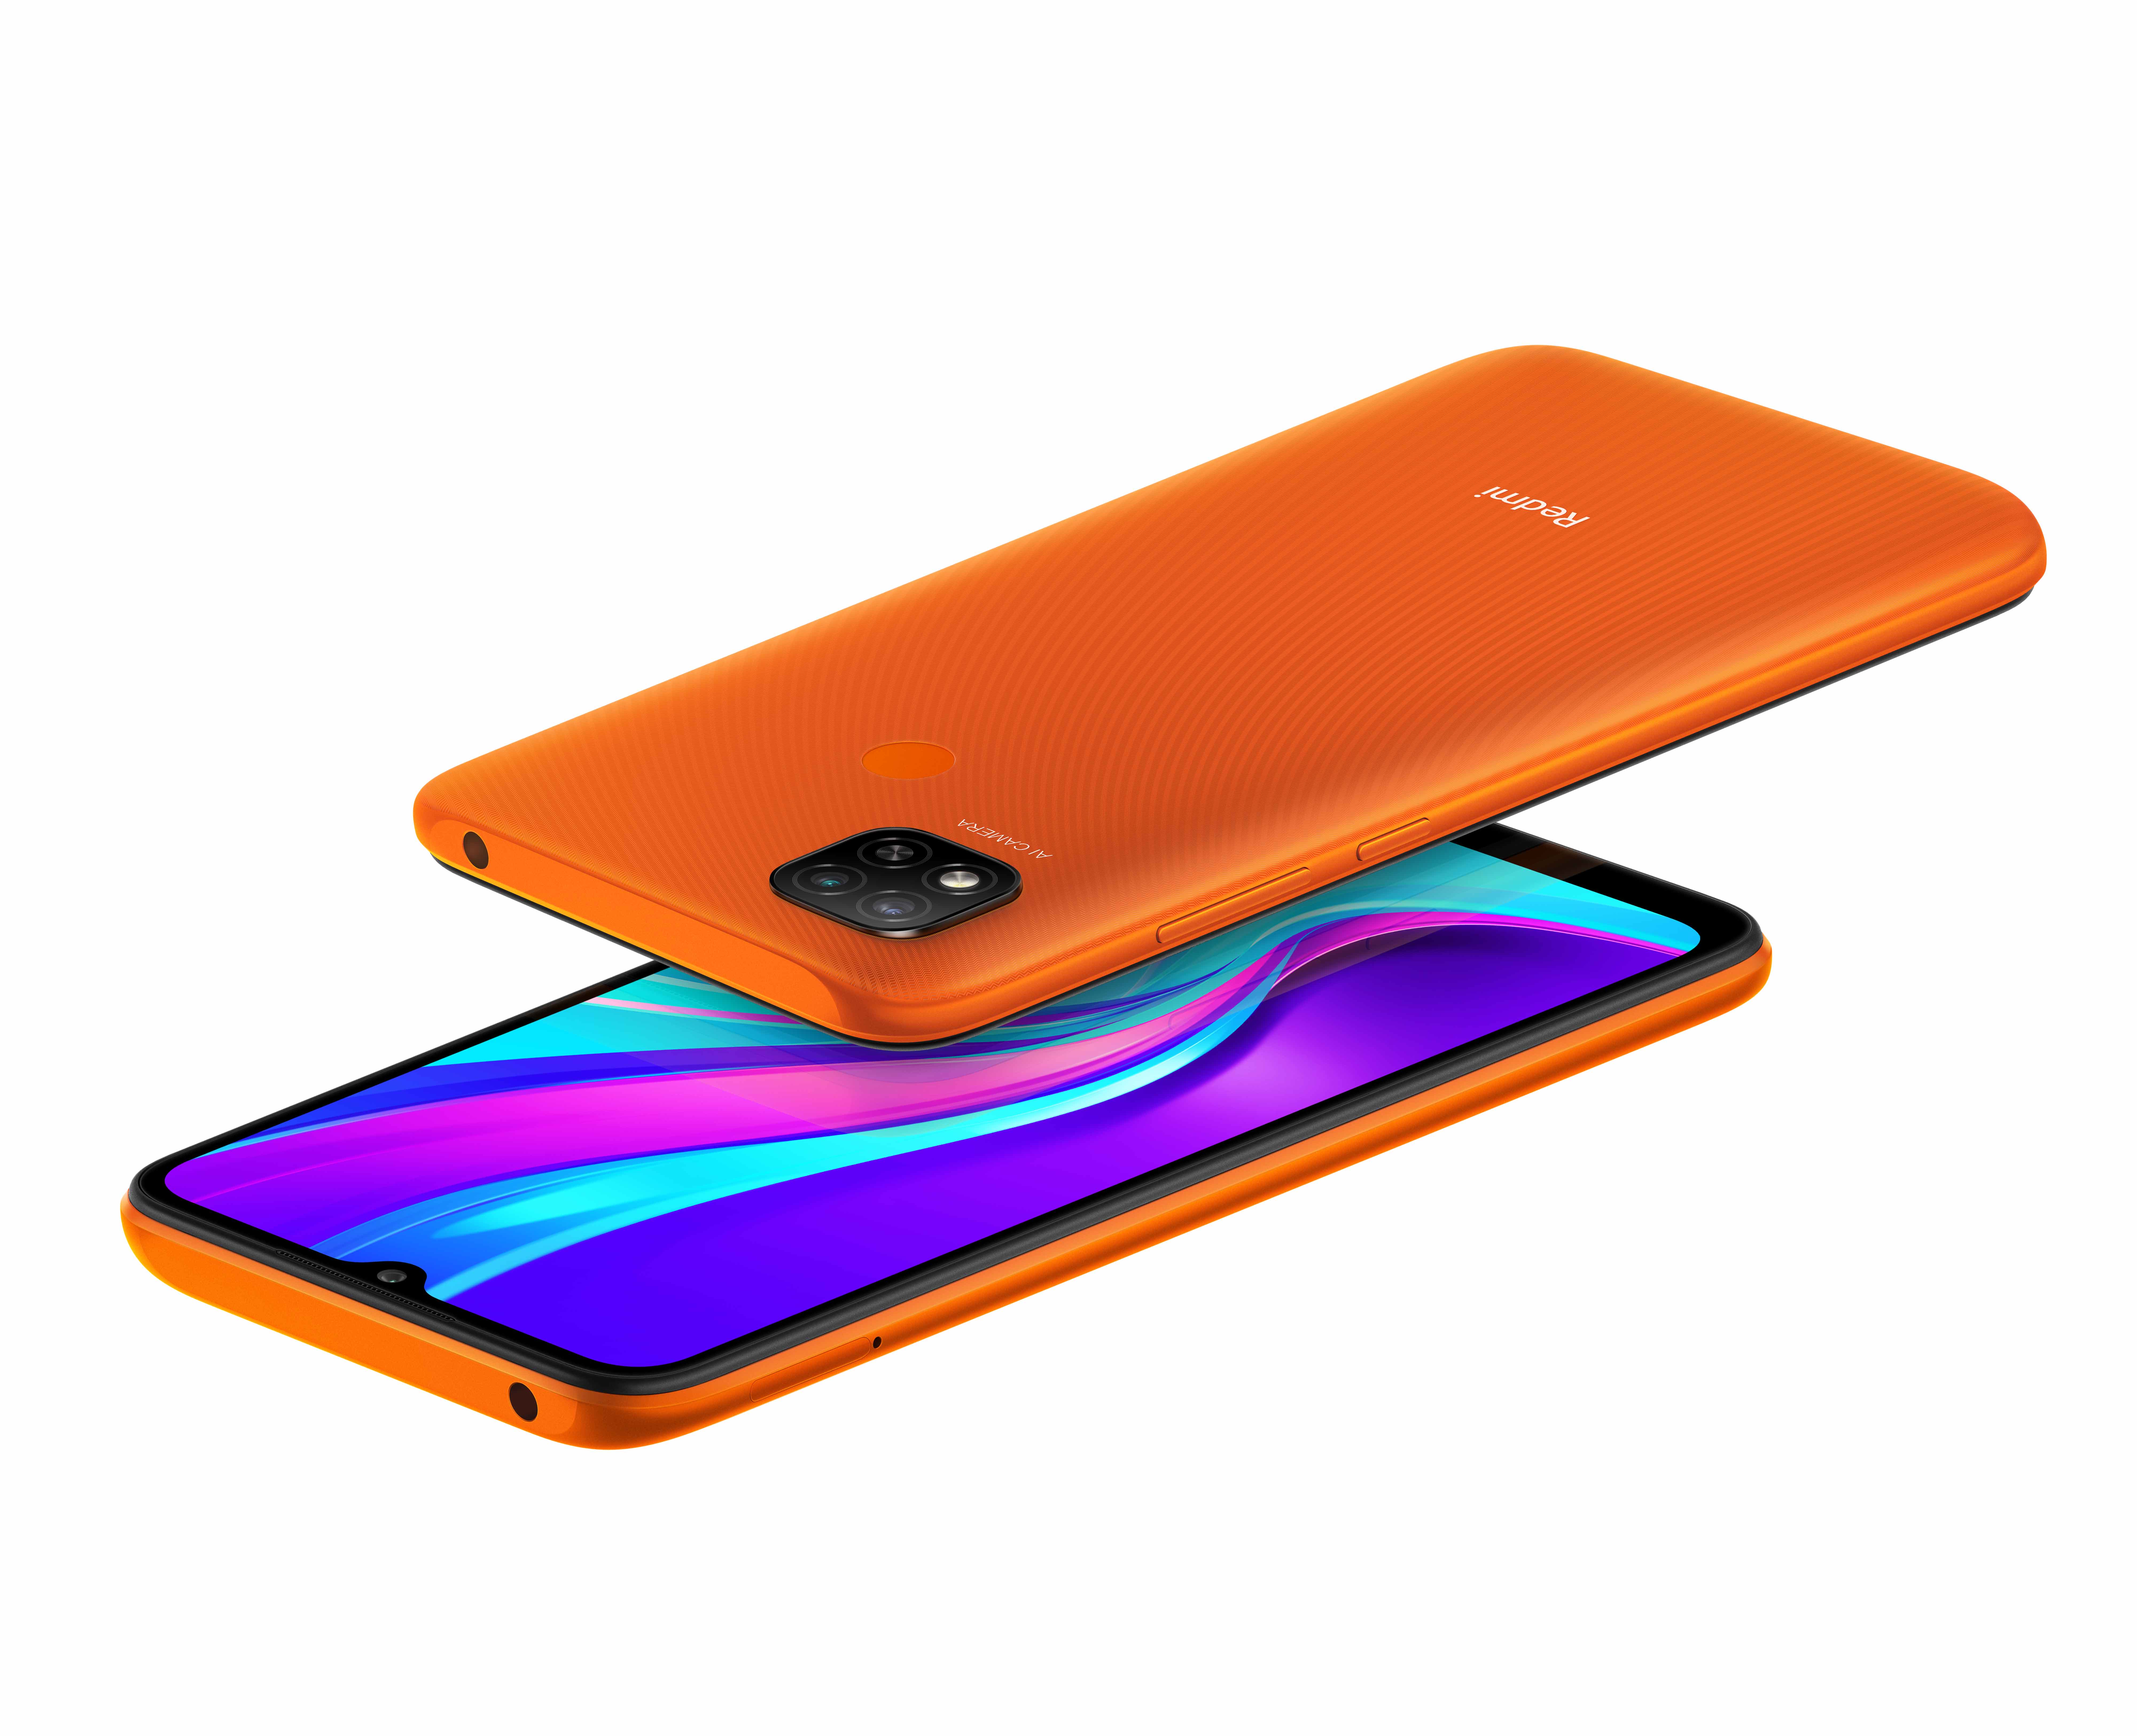 Redmi 9 Price: Xiaomi Redmi 9 with 5000mAh battery launched at a starting  price of Rs 8,999, ET Telecom